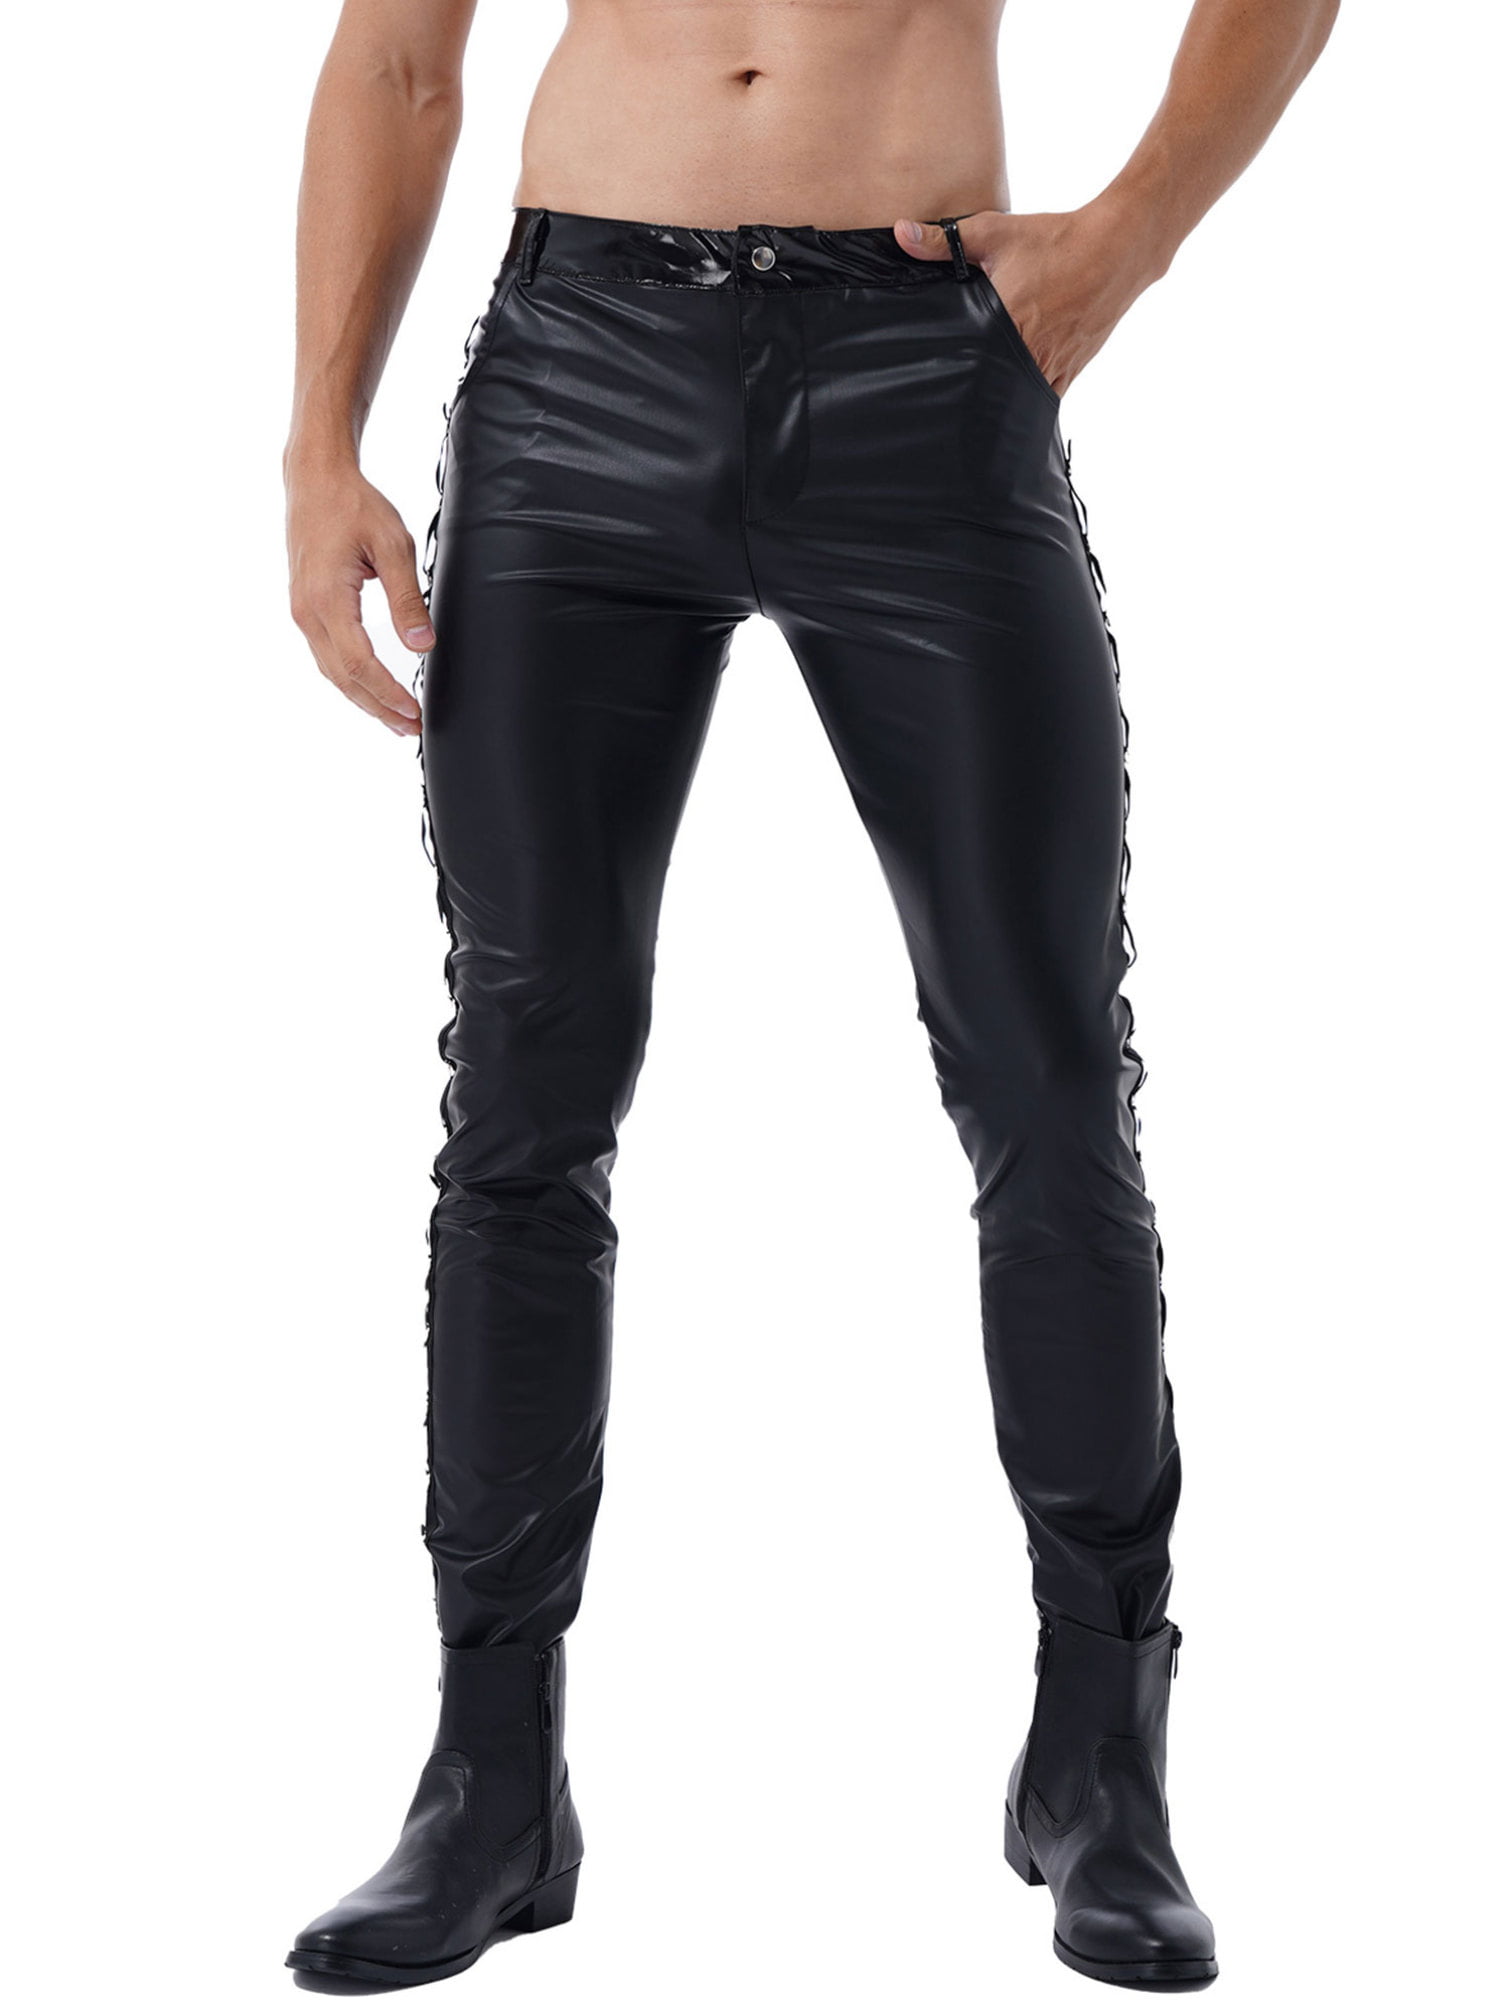 Mens Wet Look Stretch Faux Leather Trousers Soft Breathable Slim Pants Clubwear